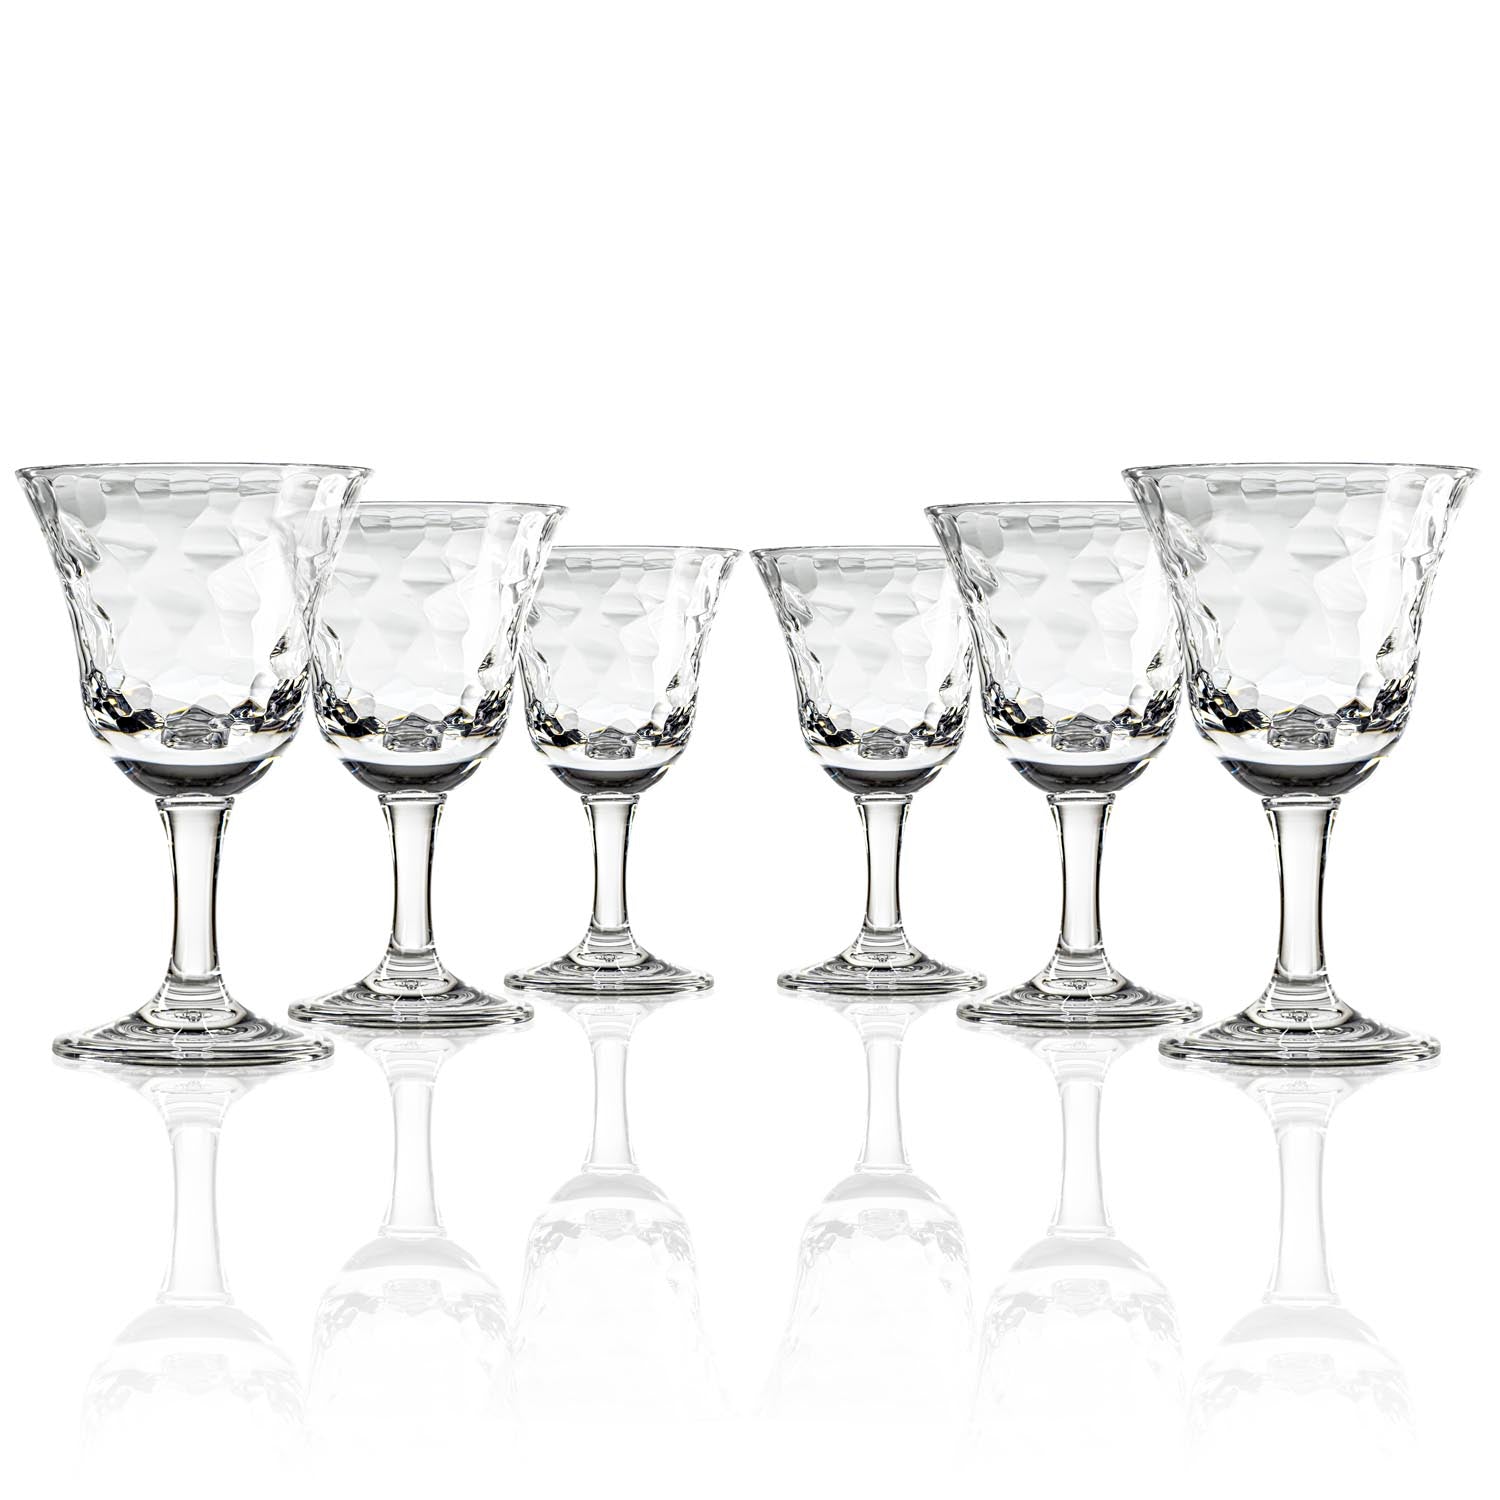 Merritt Designs Cascade Clear 12oz Acrylic Wine Stemware set of 6 front view on white background